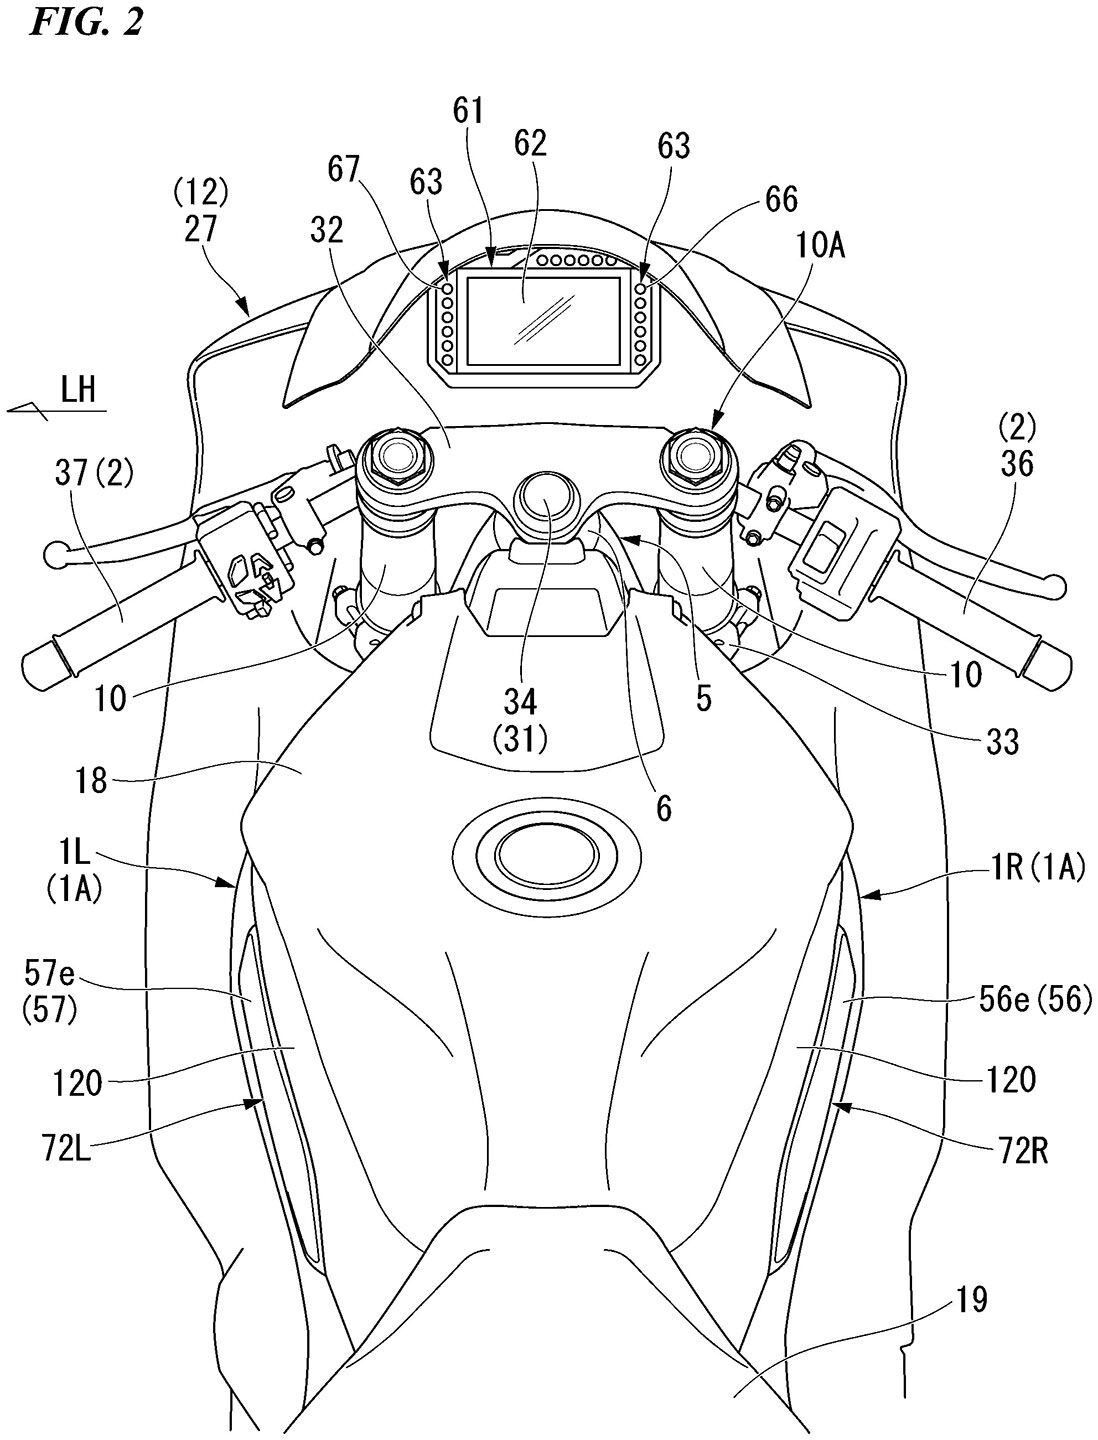 A view of the top of the motorcycle shows where the panels would deploy from, indicated by 72L and 72R.